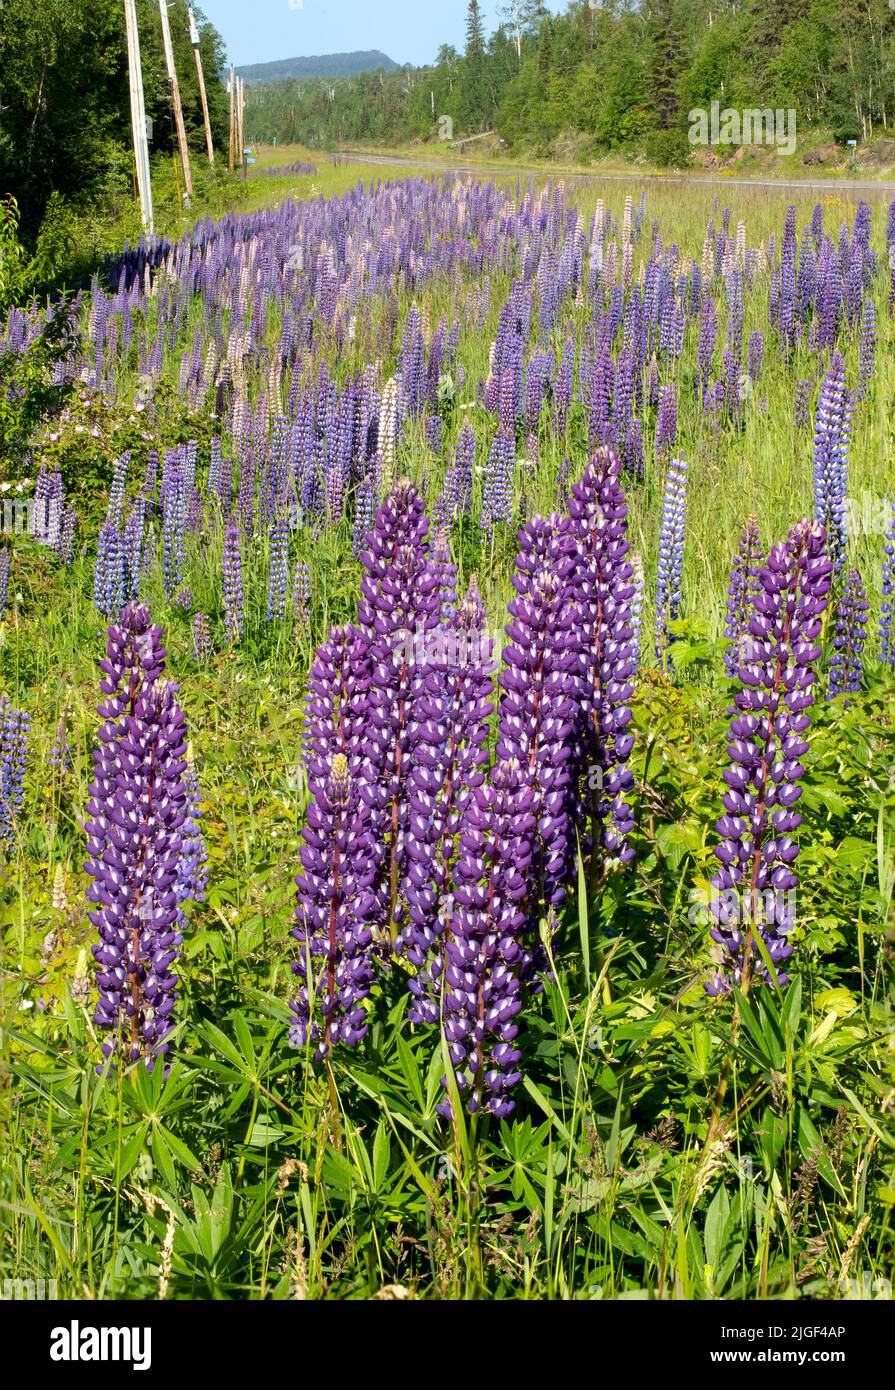 Wild perennial lupinus, lupin, or lupine flowering plants along Highway 61 on the North Shore of Lake Superior, Minnesota. One of the Sawtooth Mountai Stock Photo